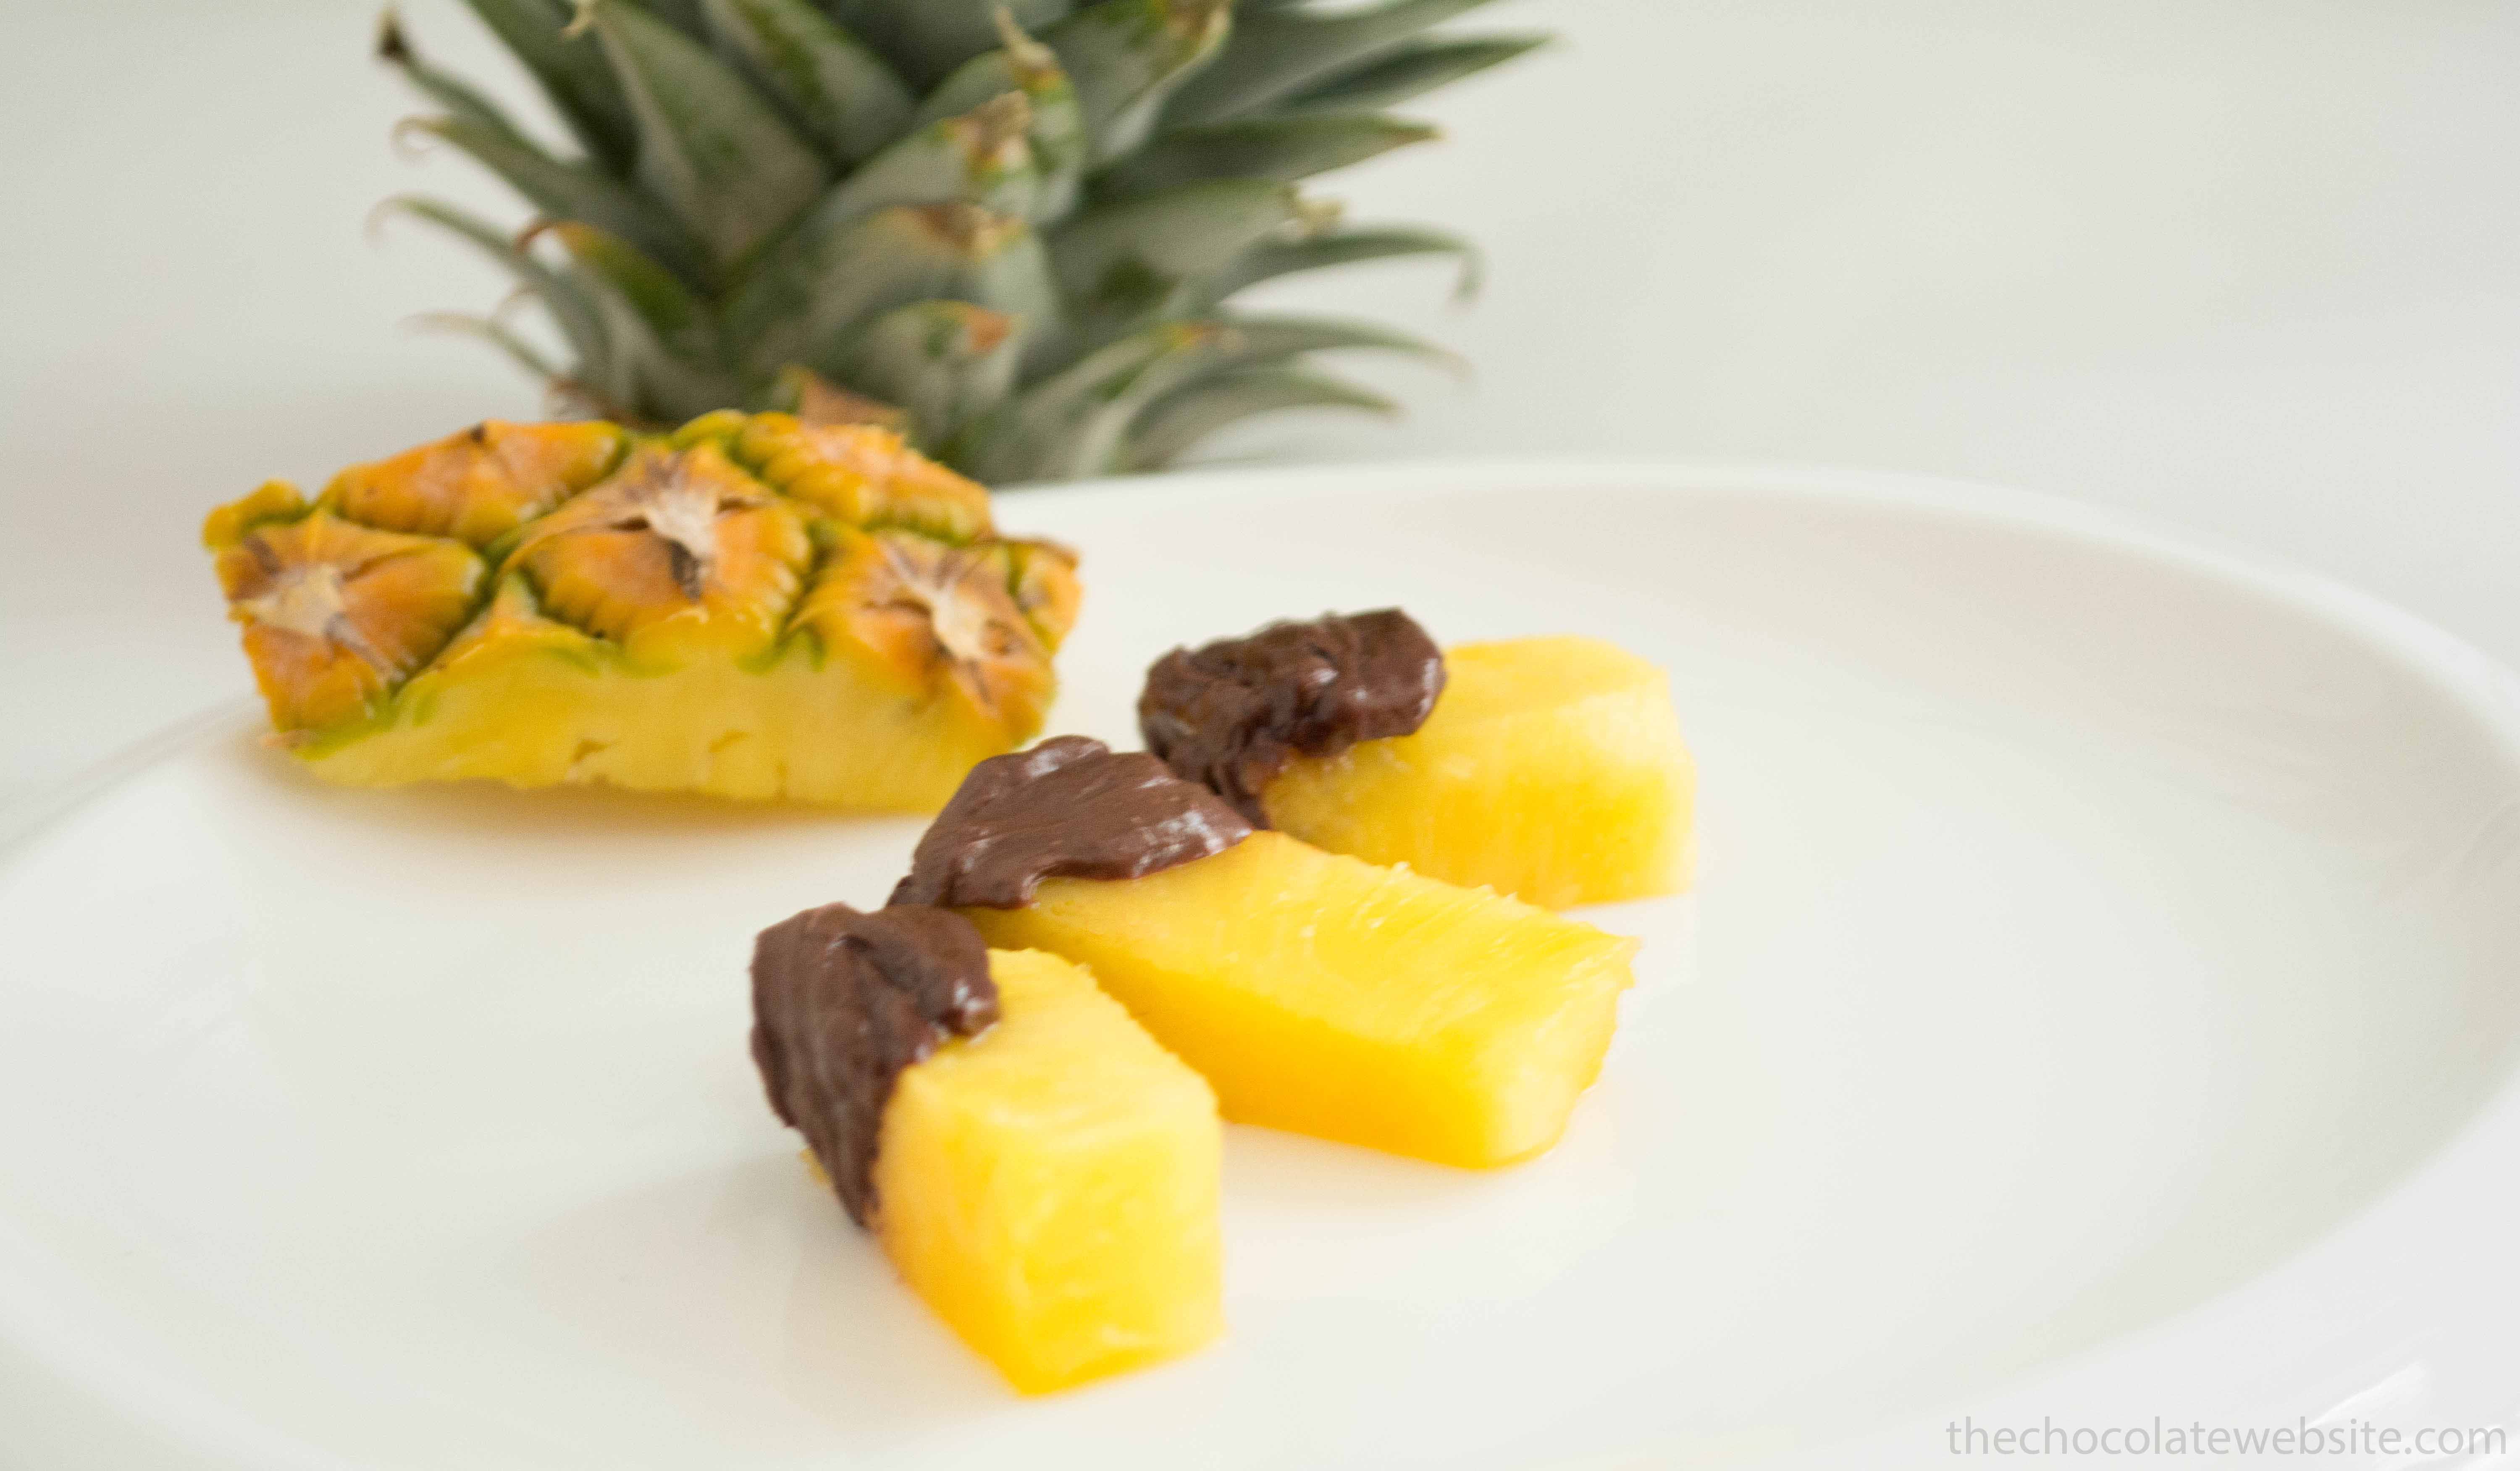 Crazy or Cool Chocolate Idea - Pineapple with Chocolate Photo